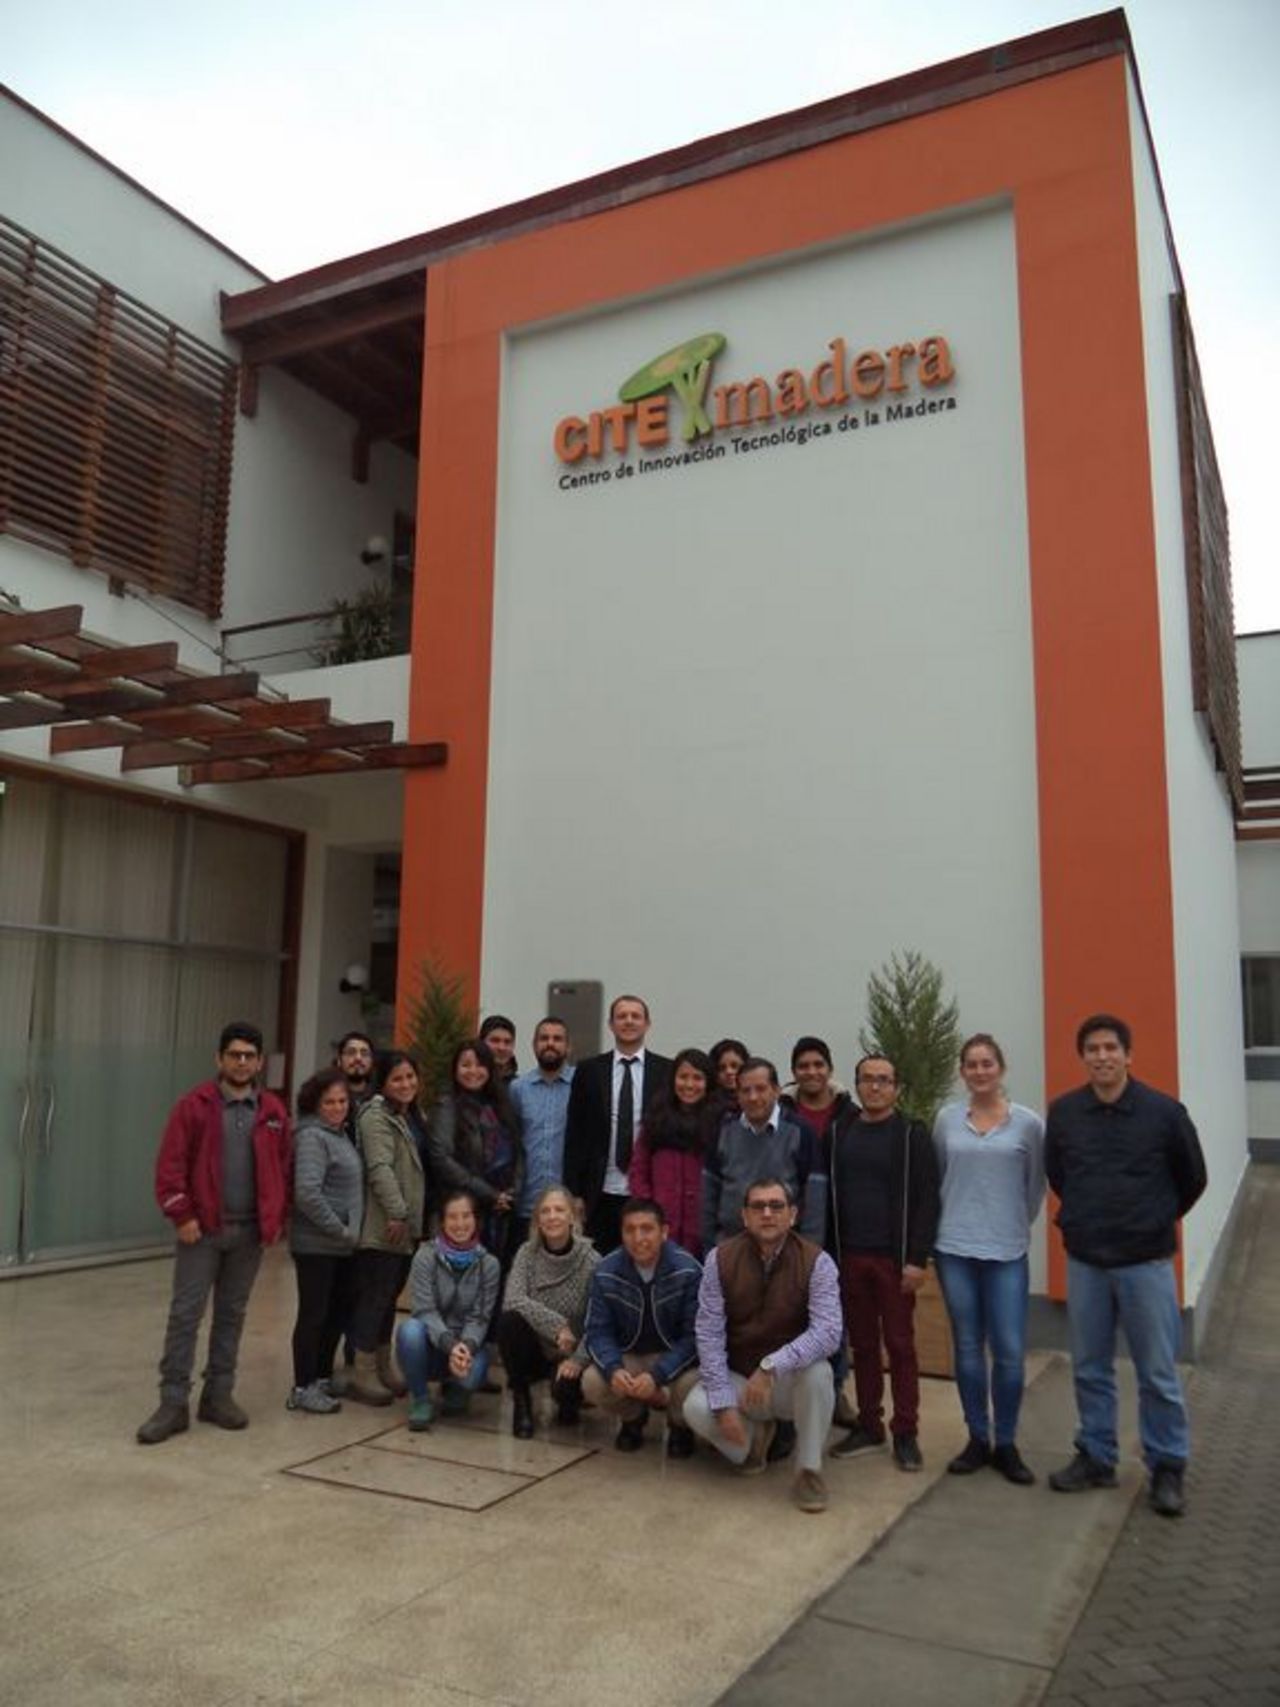 Group photo taken after workshop in the institute of the Peruvian project partner CITEmadera in Lima